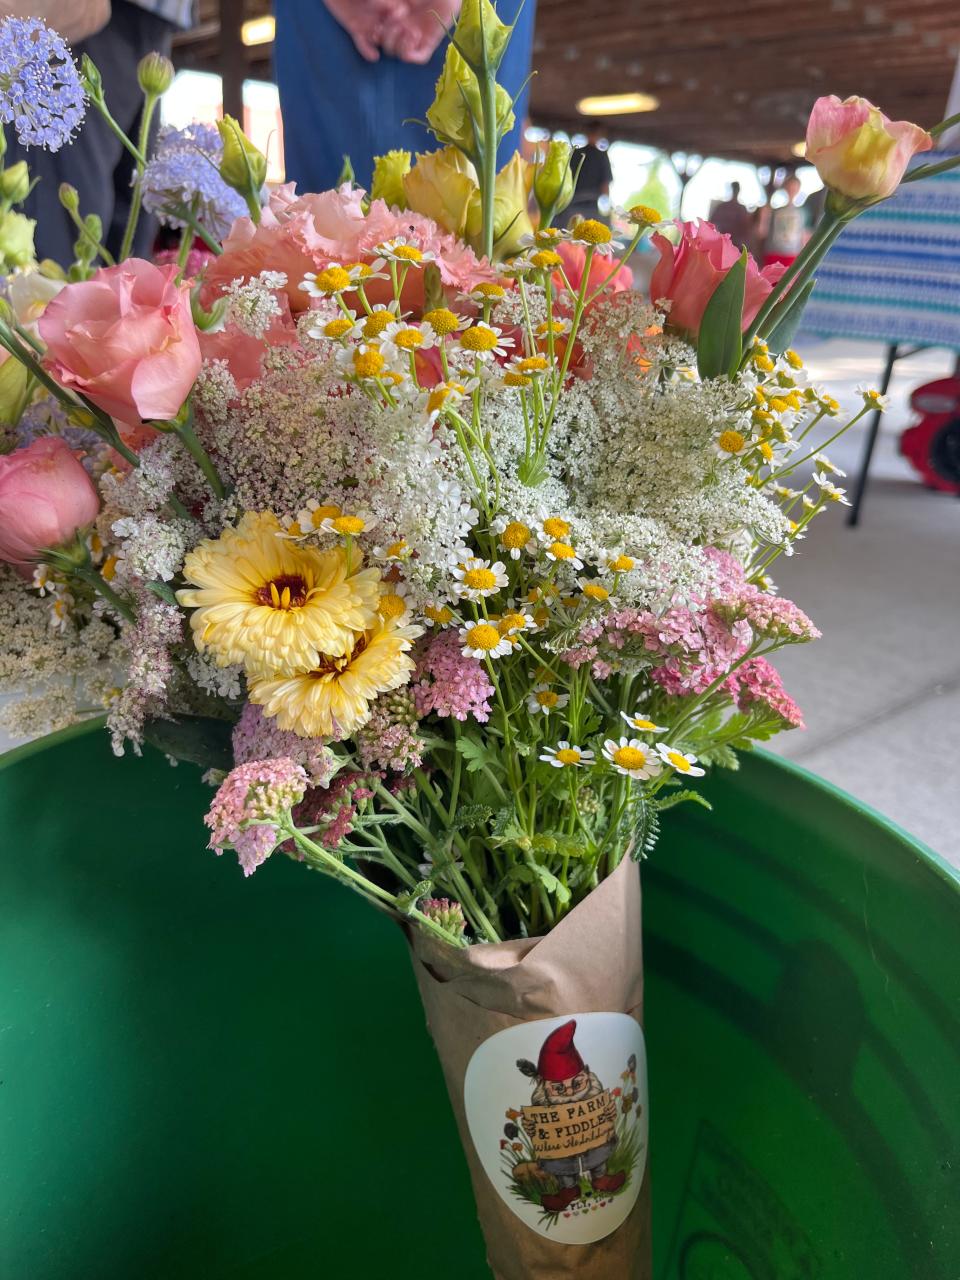 The Farm & Fiddle sell bouquets of flowers from their farm in Fly, Tennessee, in Santa Fe area of Maury County, at various farmers markets, including the Columbia Farmers Market at Riverside Park on Saturday mornings until noon.